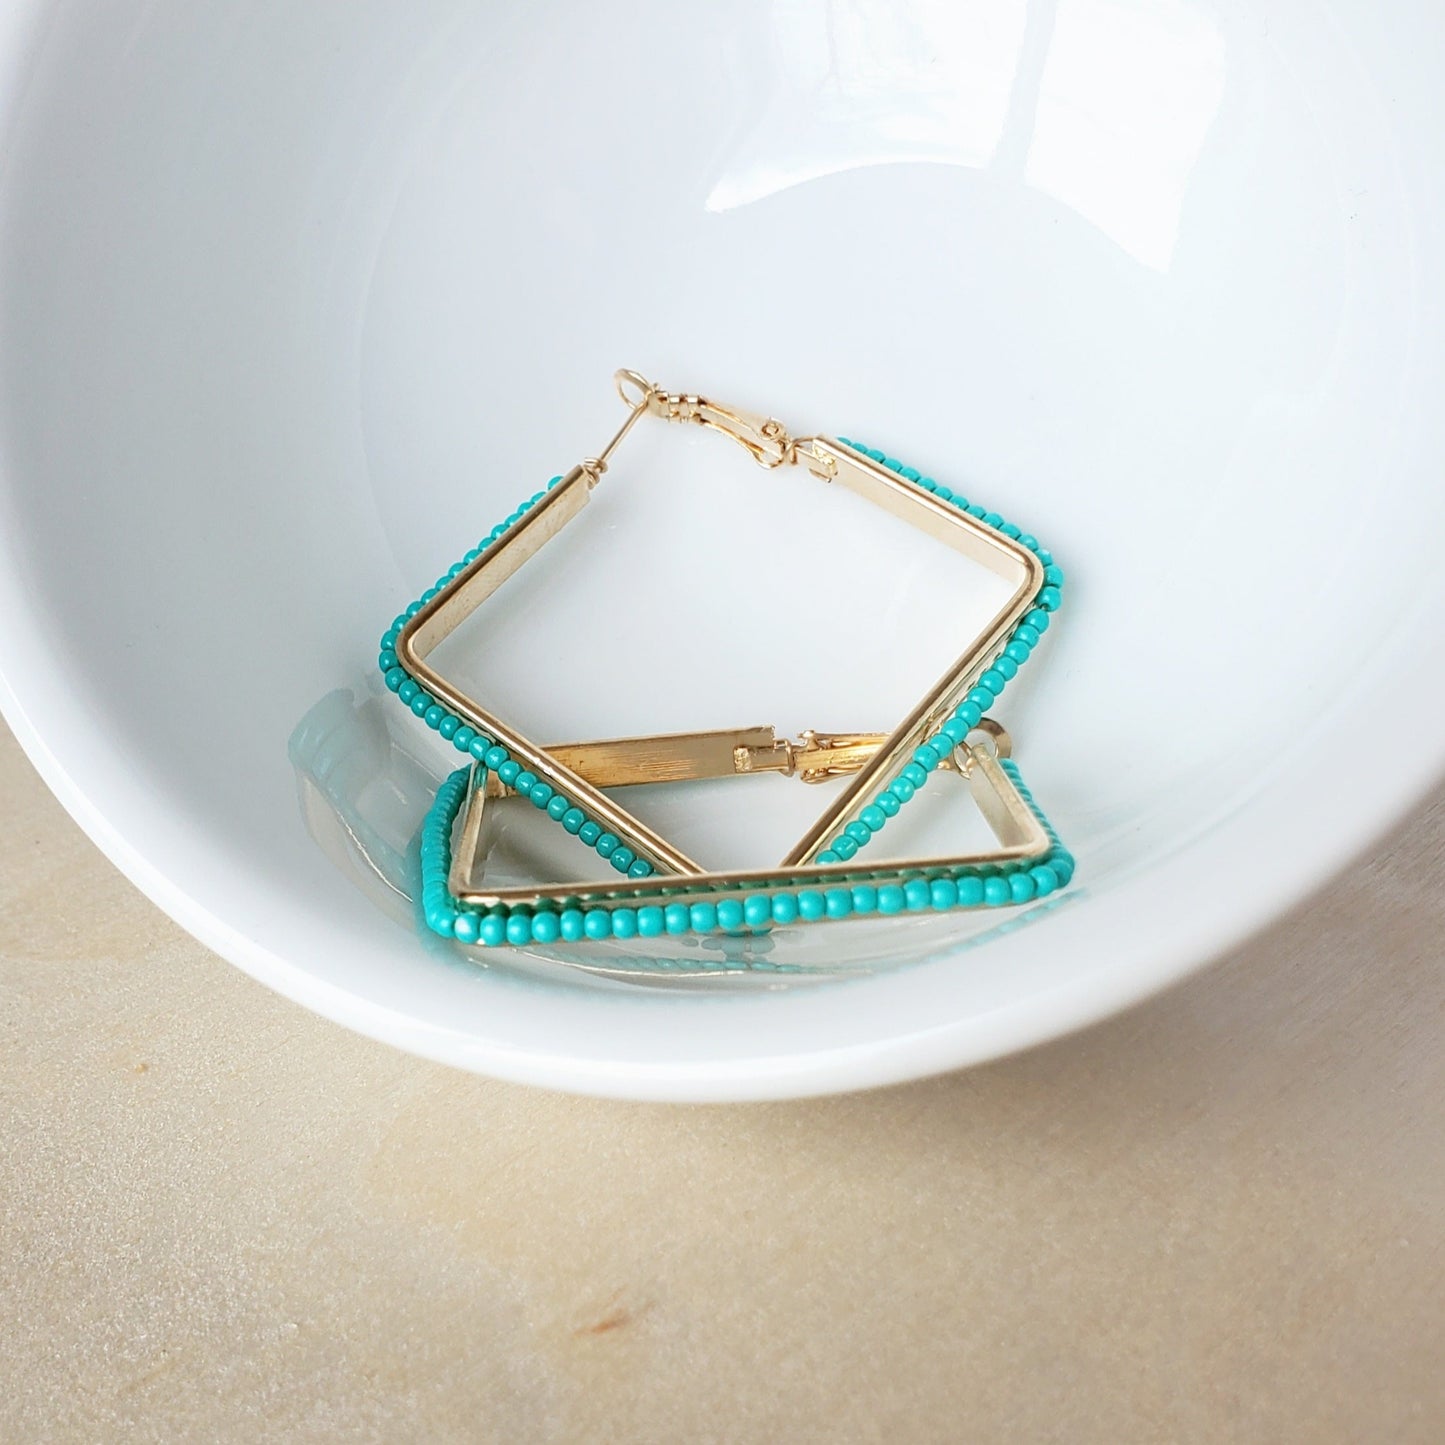 A shiny white ceramic bowl sits on a light wooden surface. in the bowl lays a pair of 2 inch square hinge back earrings. the earrings are made of gold metal wrapped with turquoise rice beads